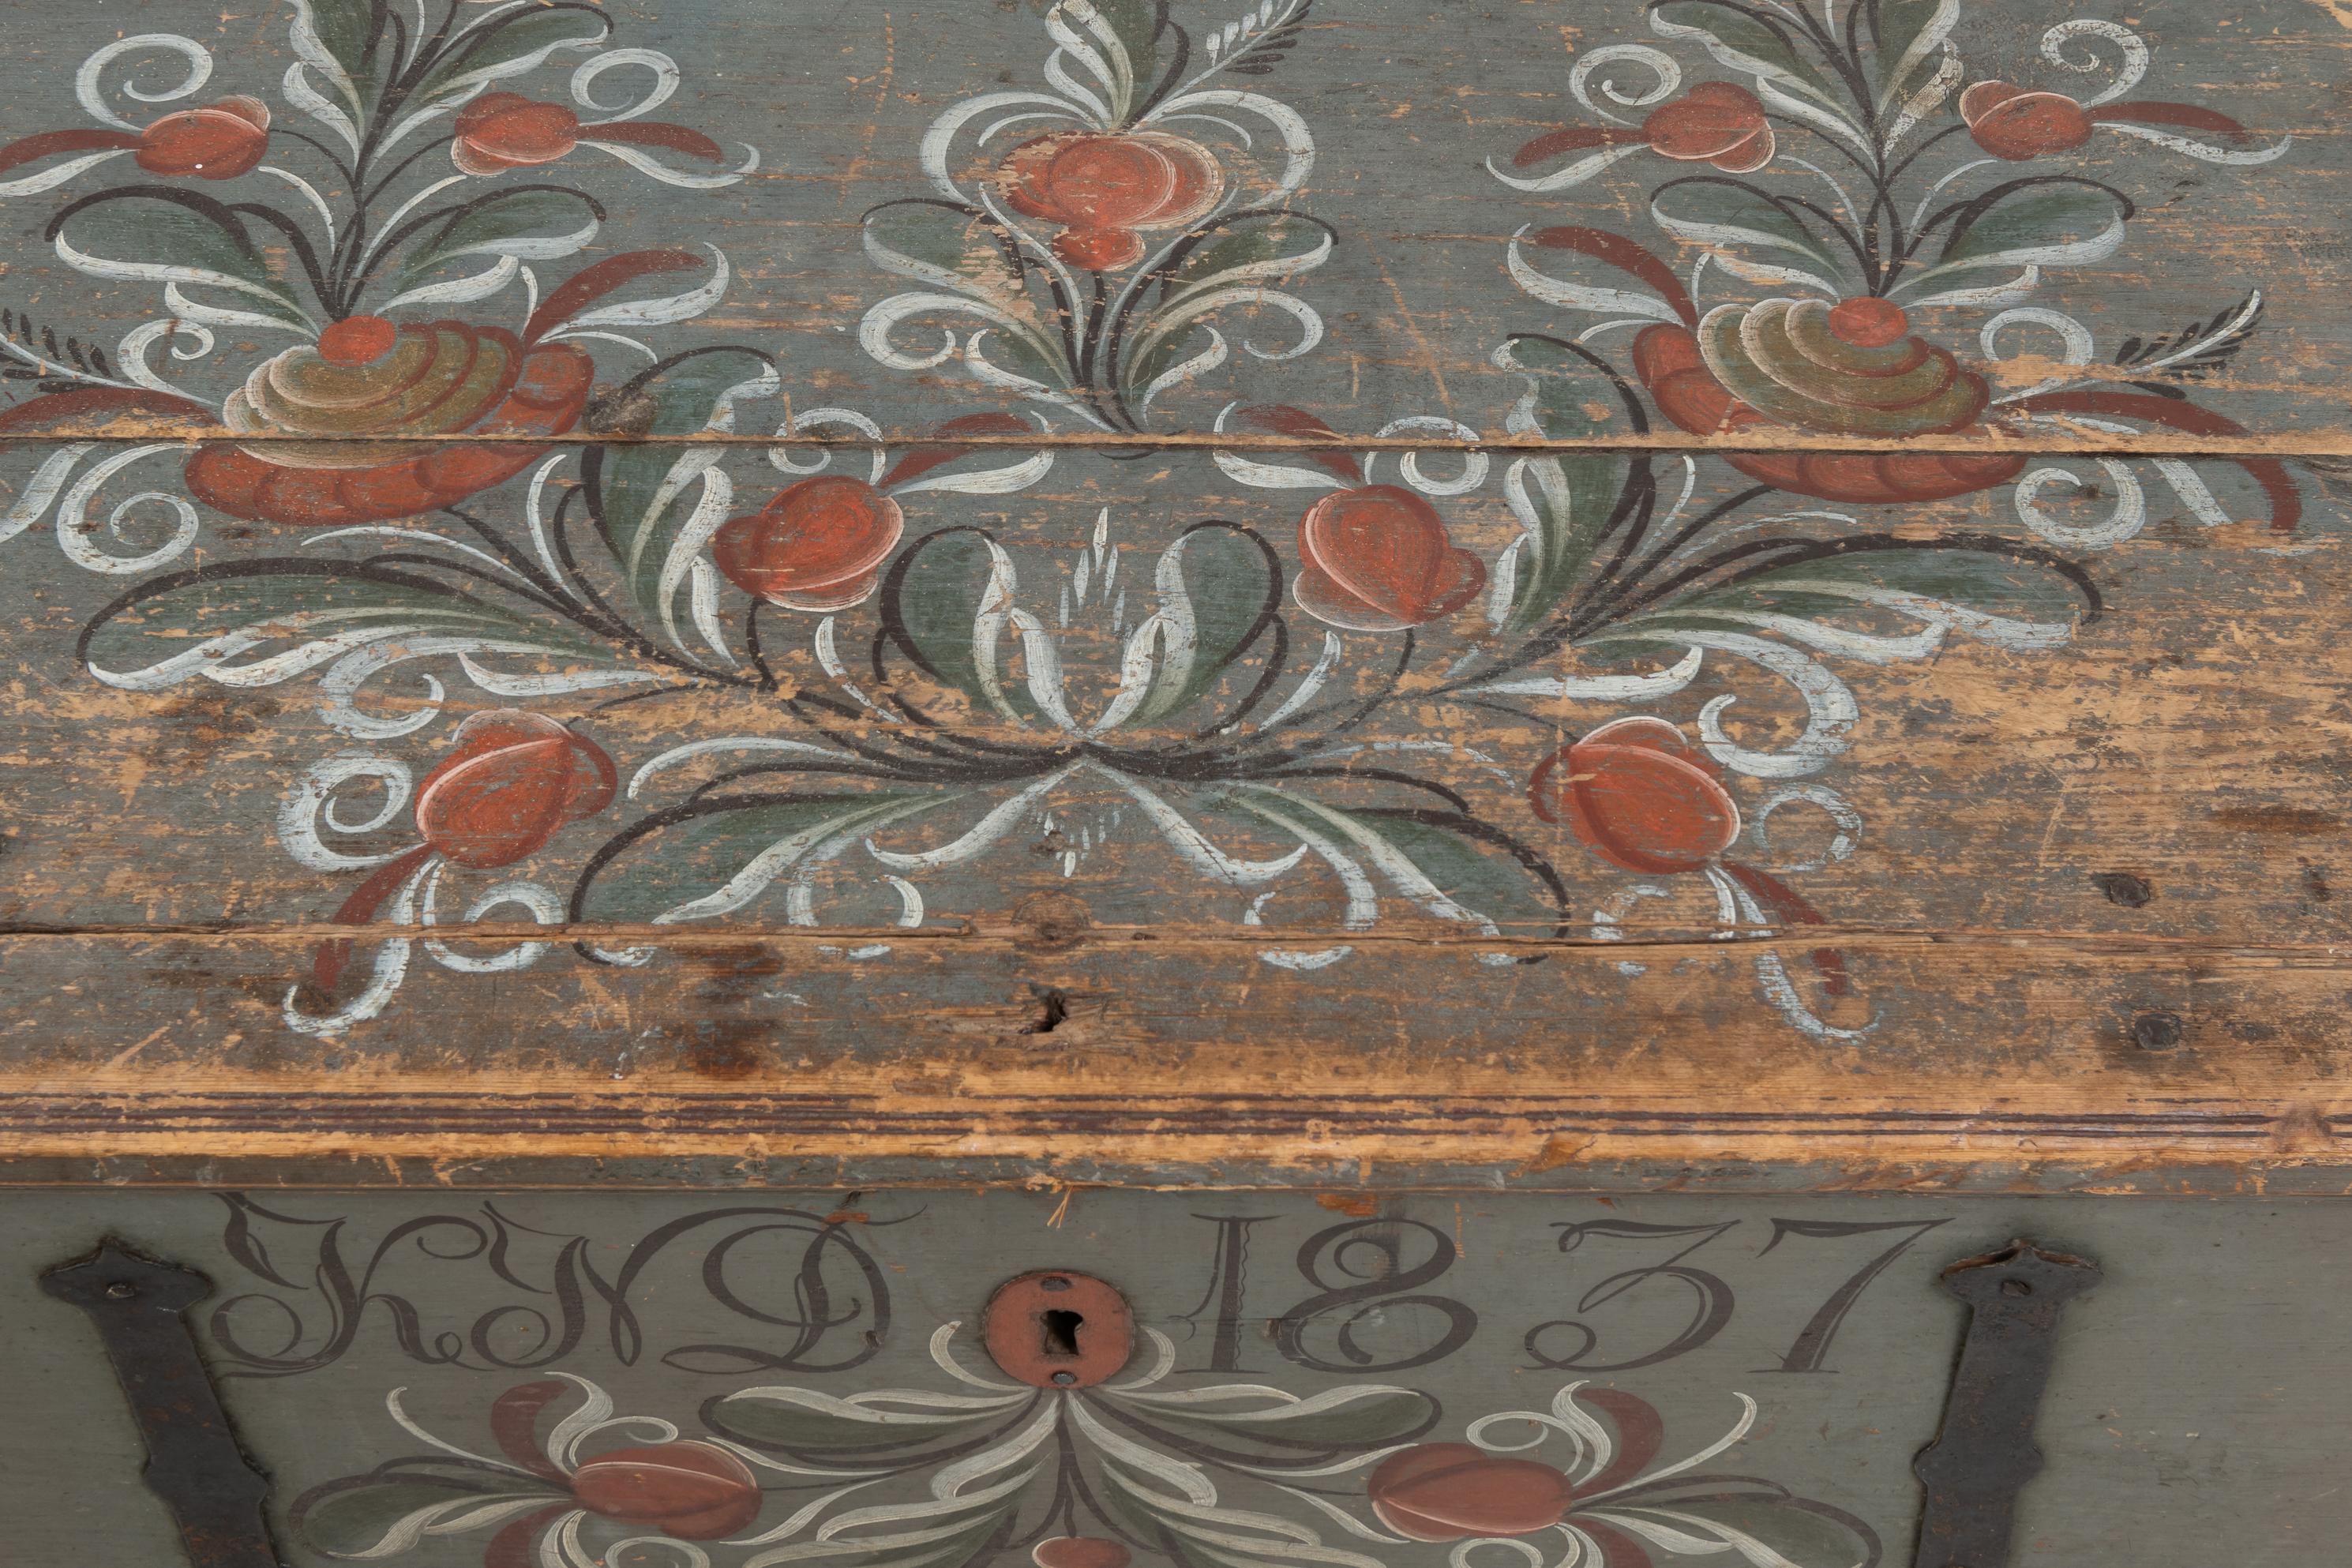 19th Century Northern Swedish Painted Chest In Good Condition For Sale In Kramfors, SE